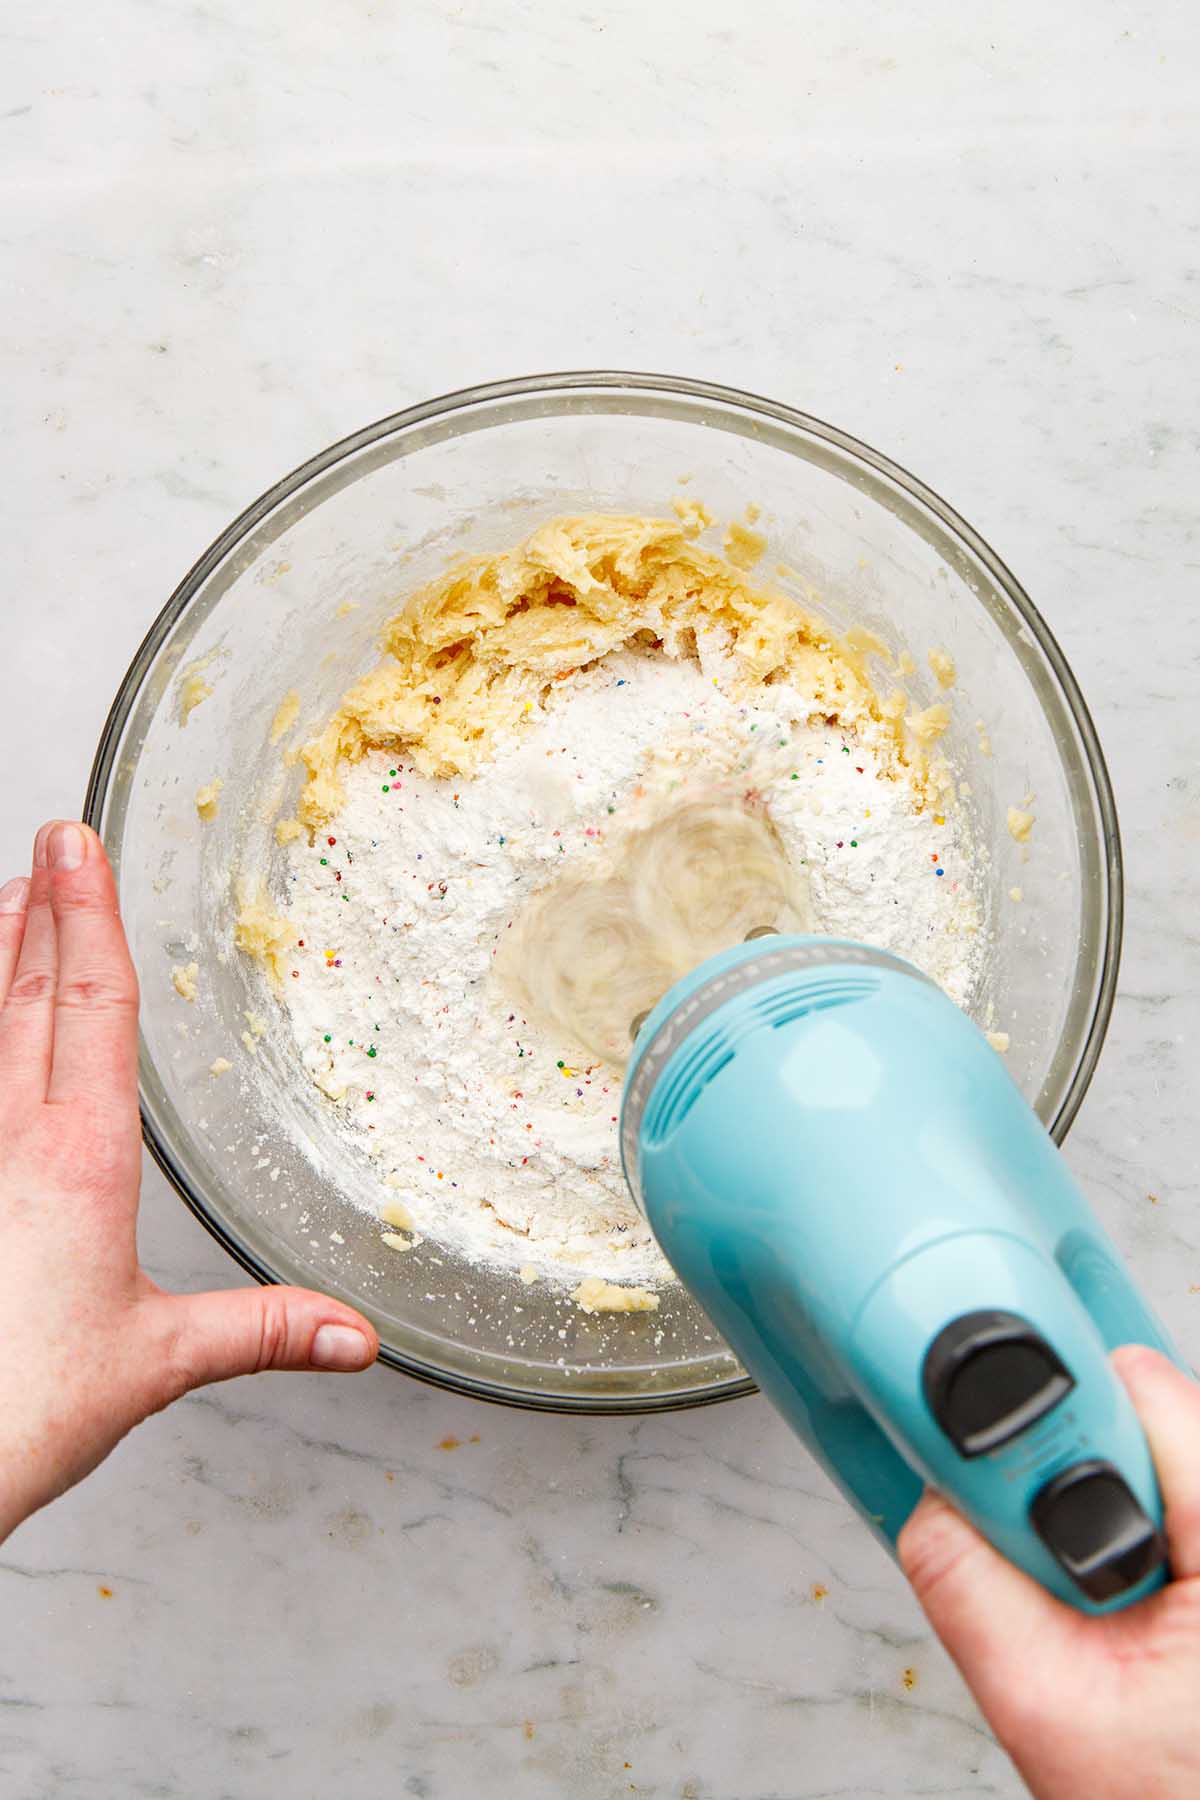 A hand holding a hand mixer to mix flour into cookie dough.